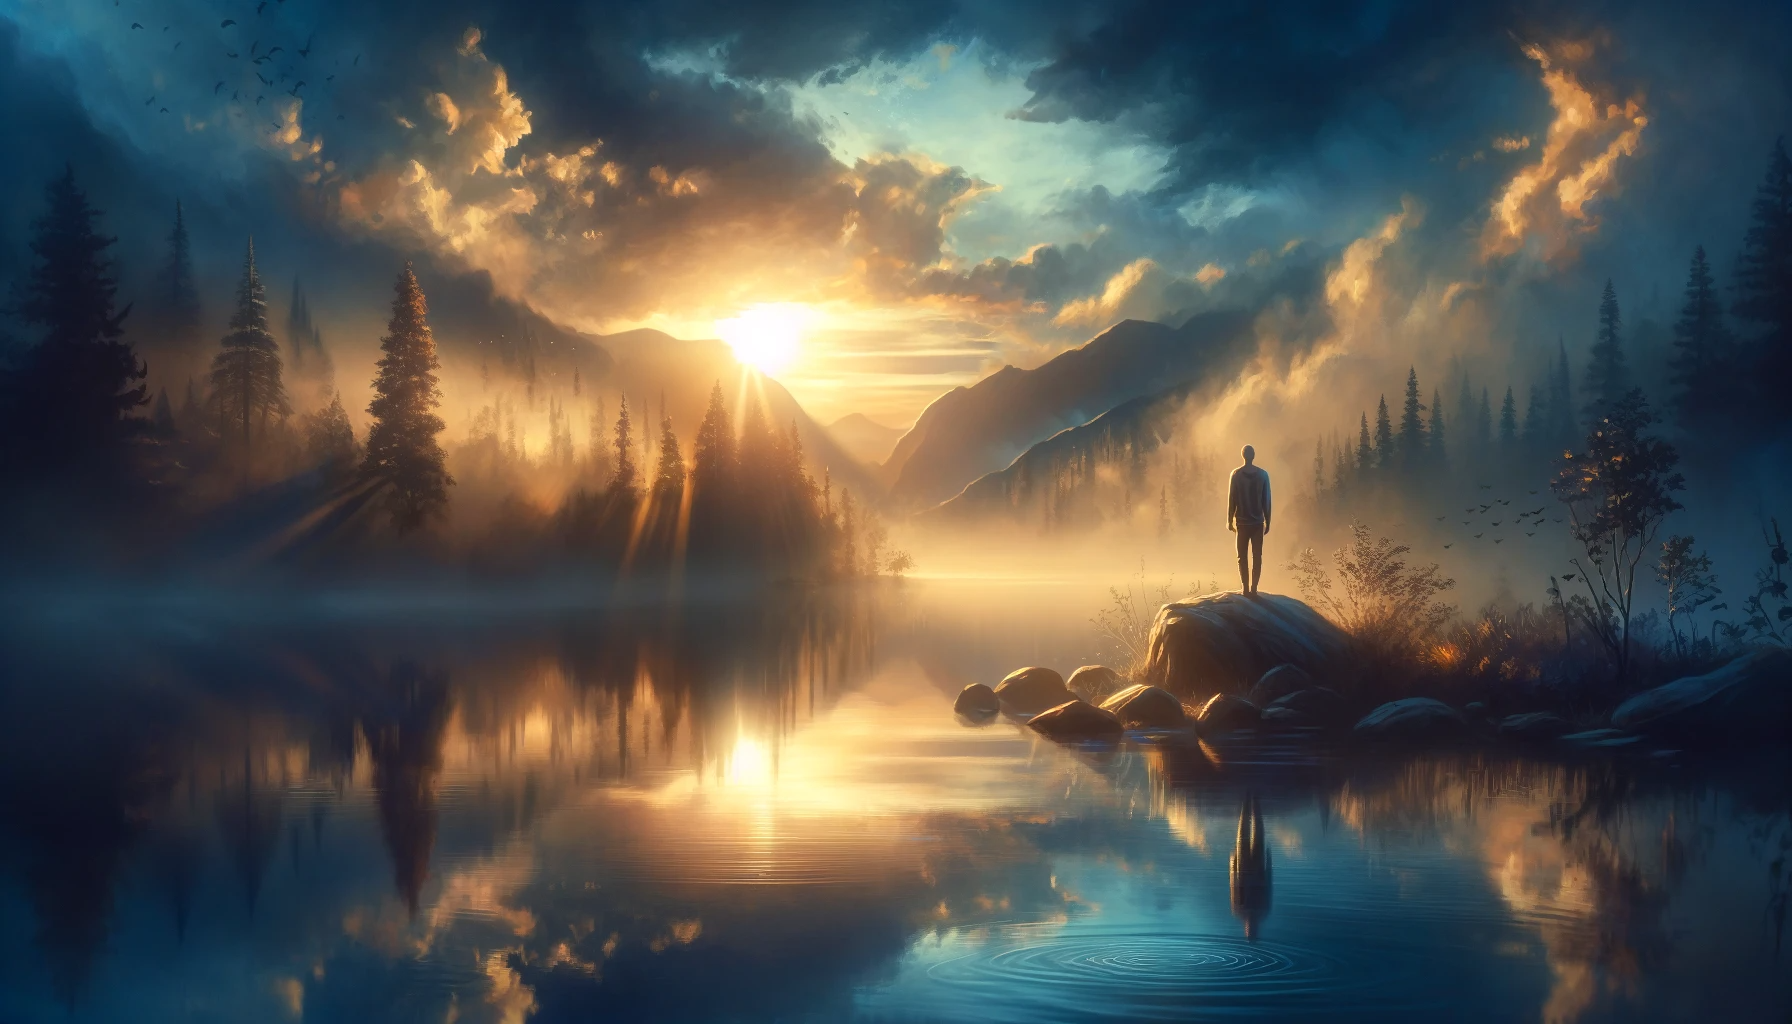 An image that captures the essence of gratitude towards a Higher Power in recovery. The scene should depict a serene and reflective moment, perhaps a